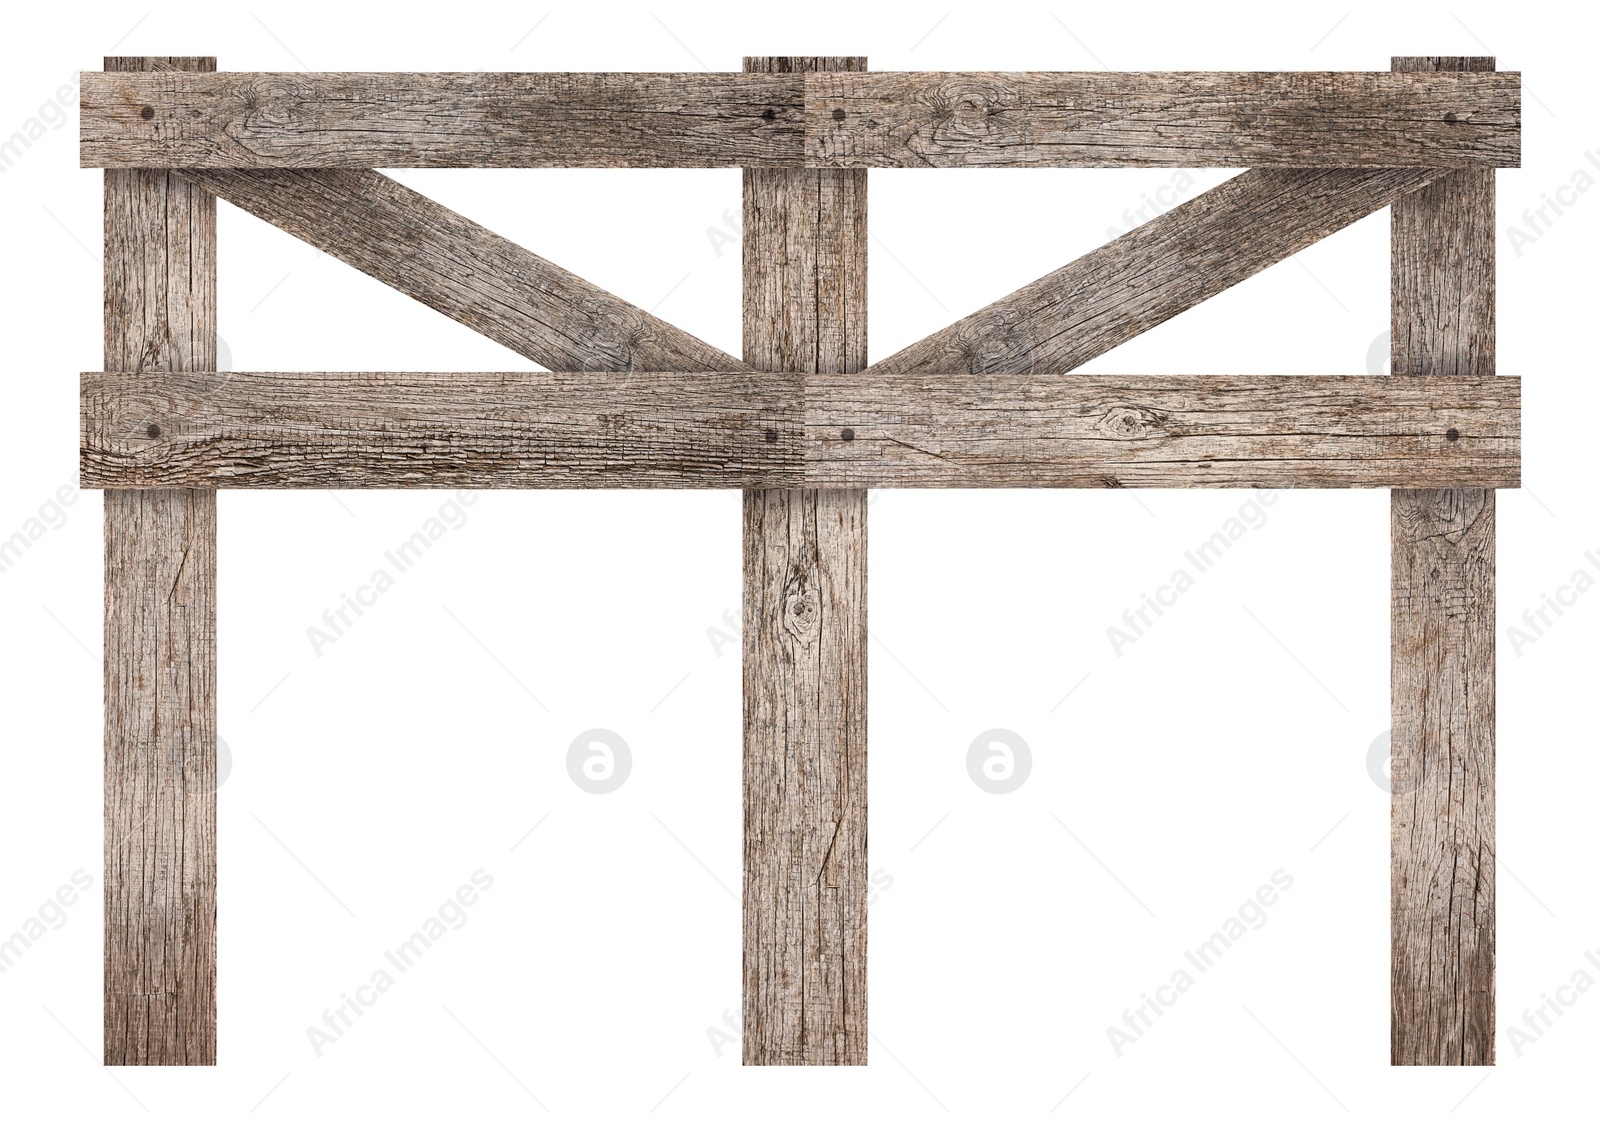 Image of Fence made of wooden planks isolated on white